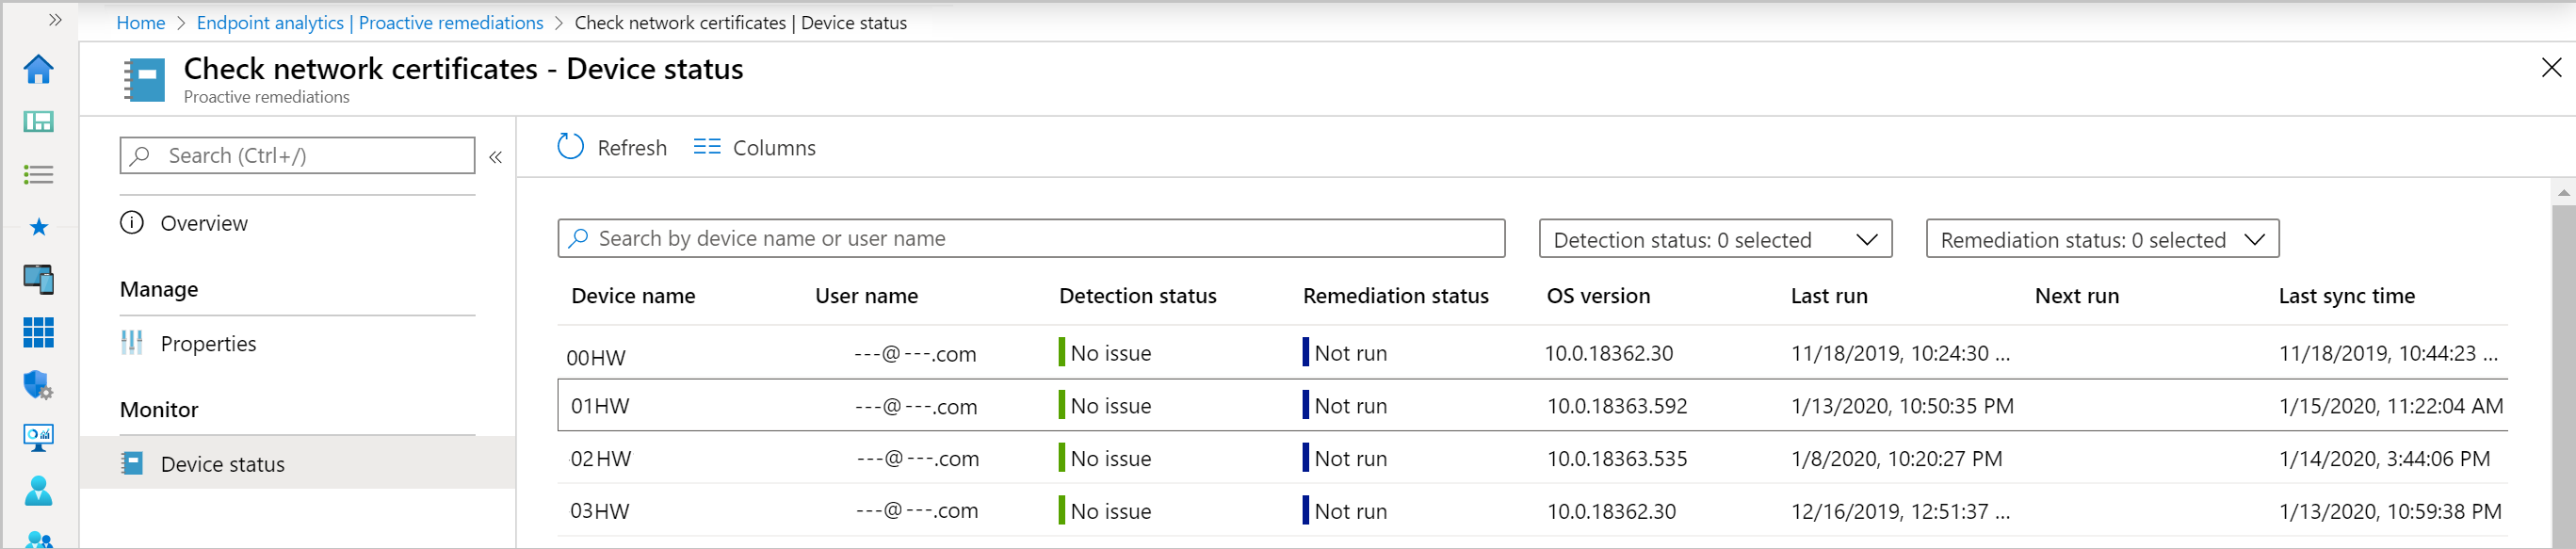 Endpoint analytics Proactive remediations device status.